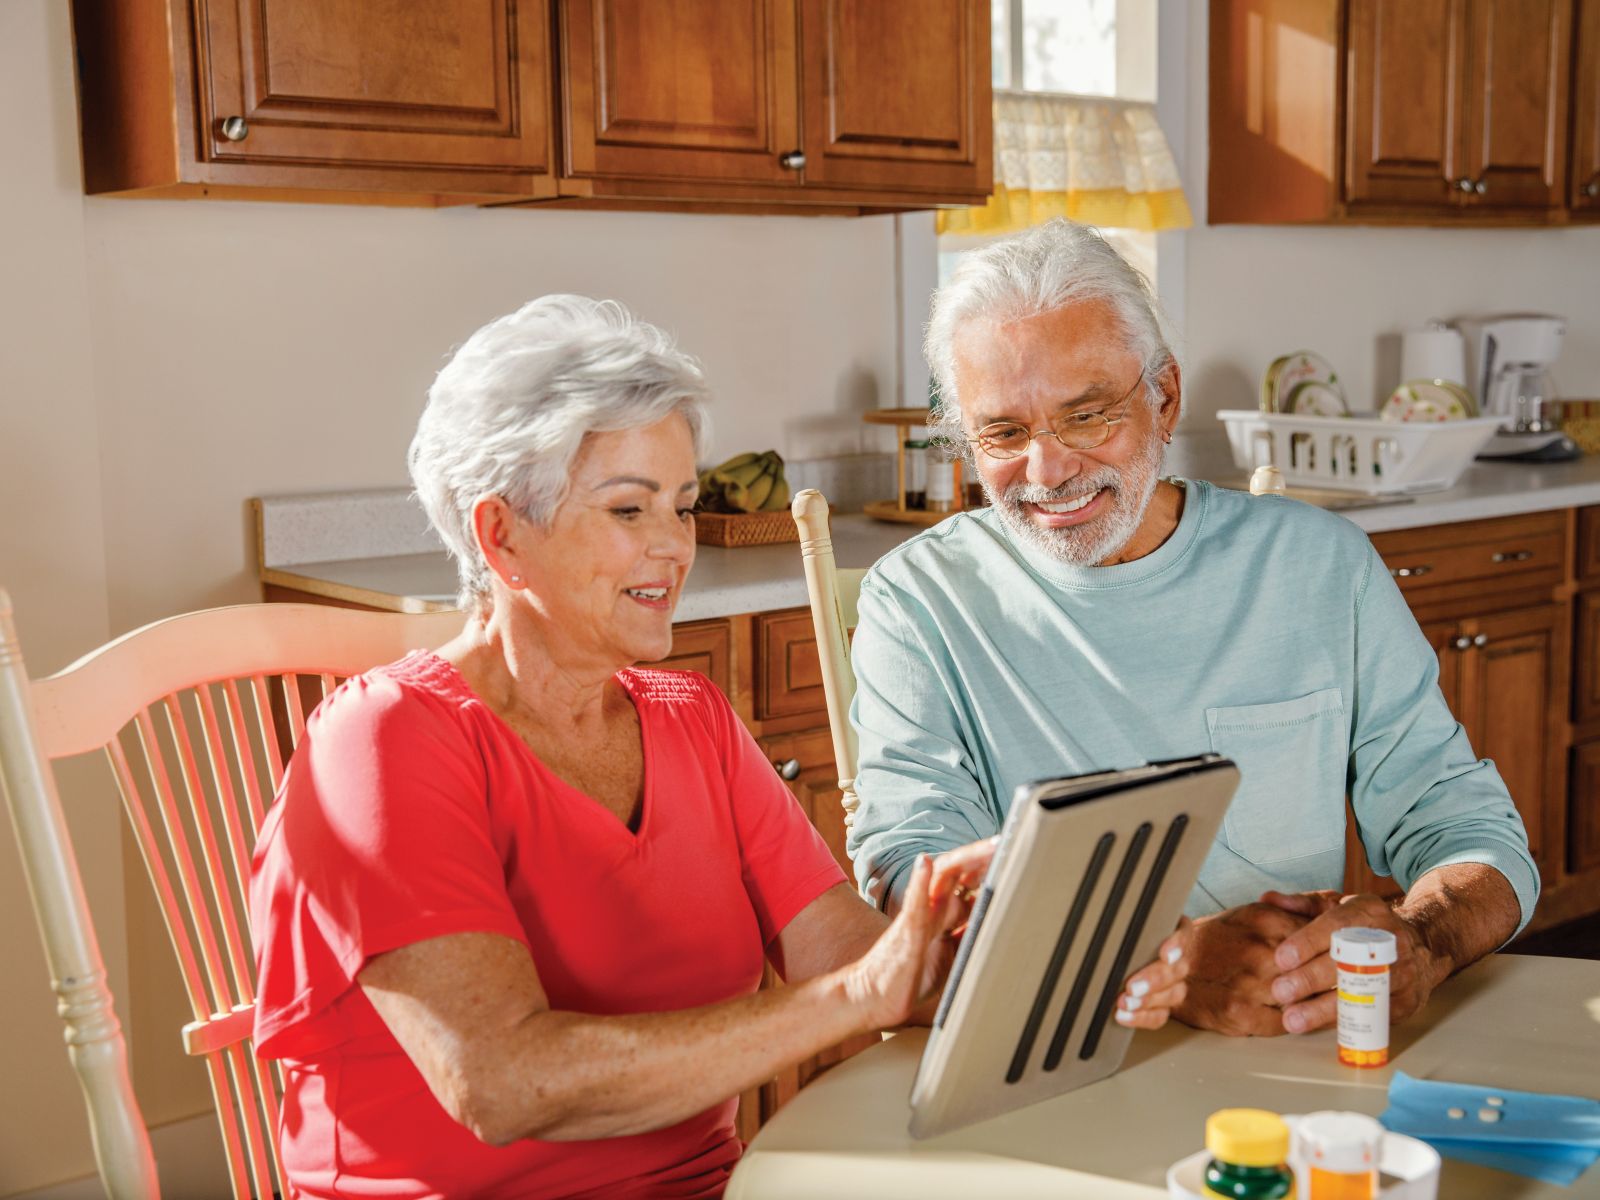 Older man and woman use tablet at table.